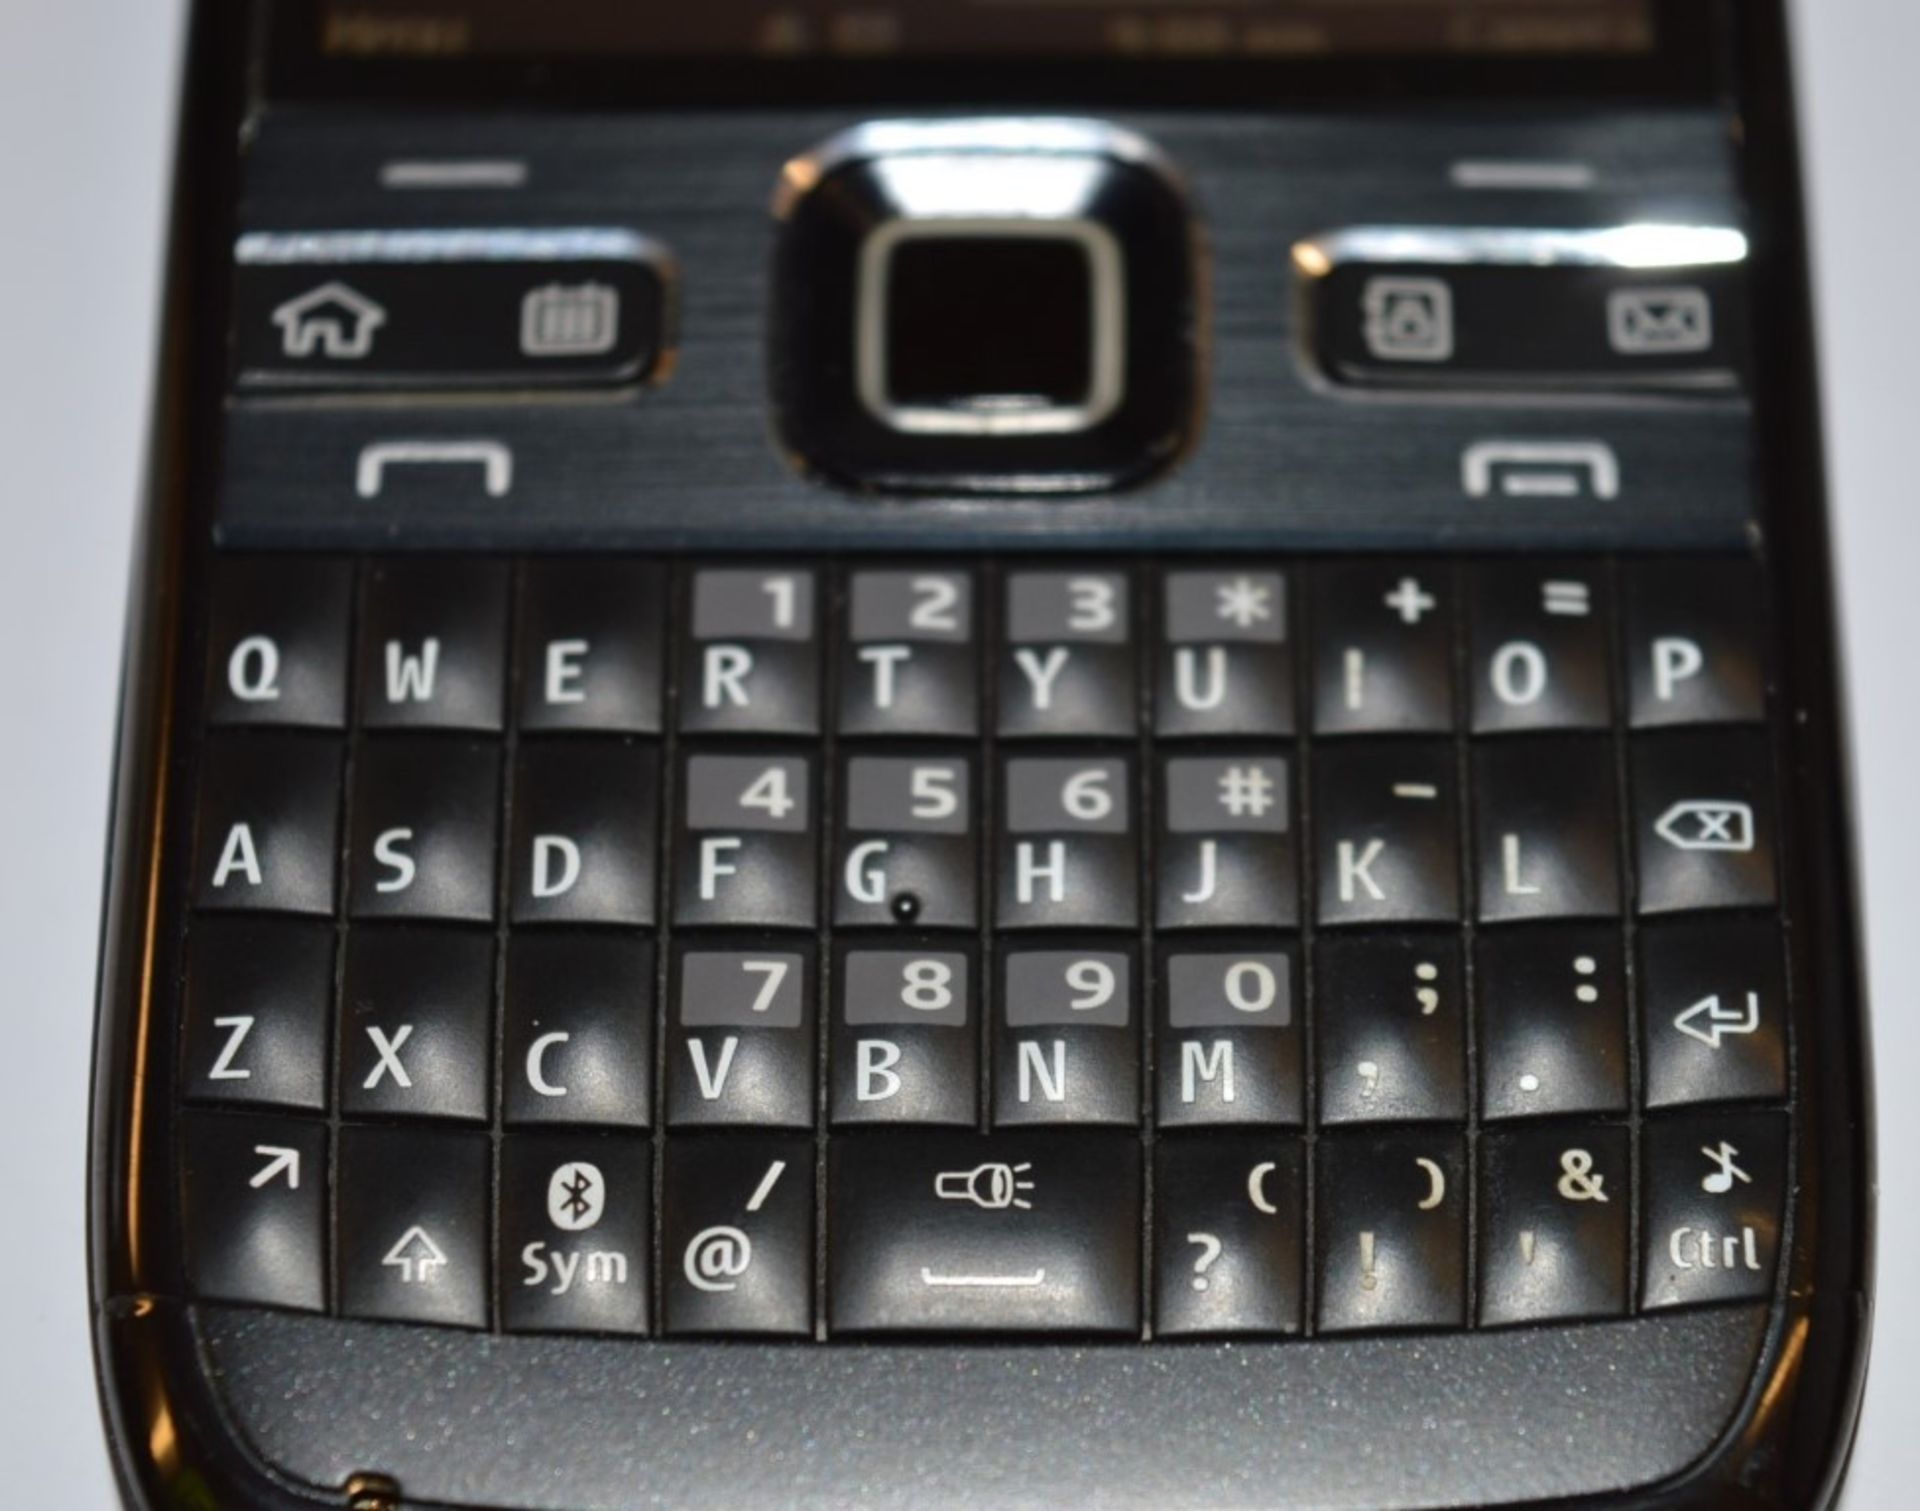 1 x Nokia E72 Mobile Phone Handset With Charger - Features Qwerty Keyboard, 600mhz CPU, 250mb Storag - Image 4 of 6